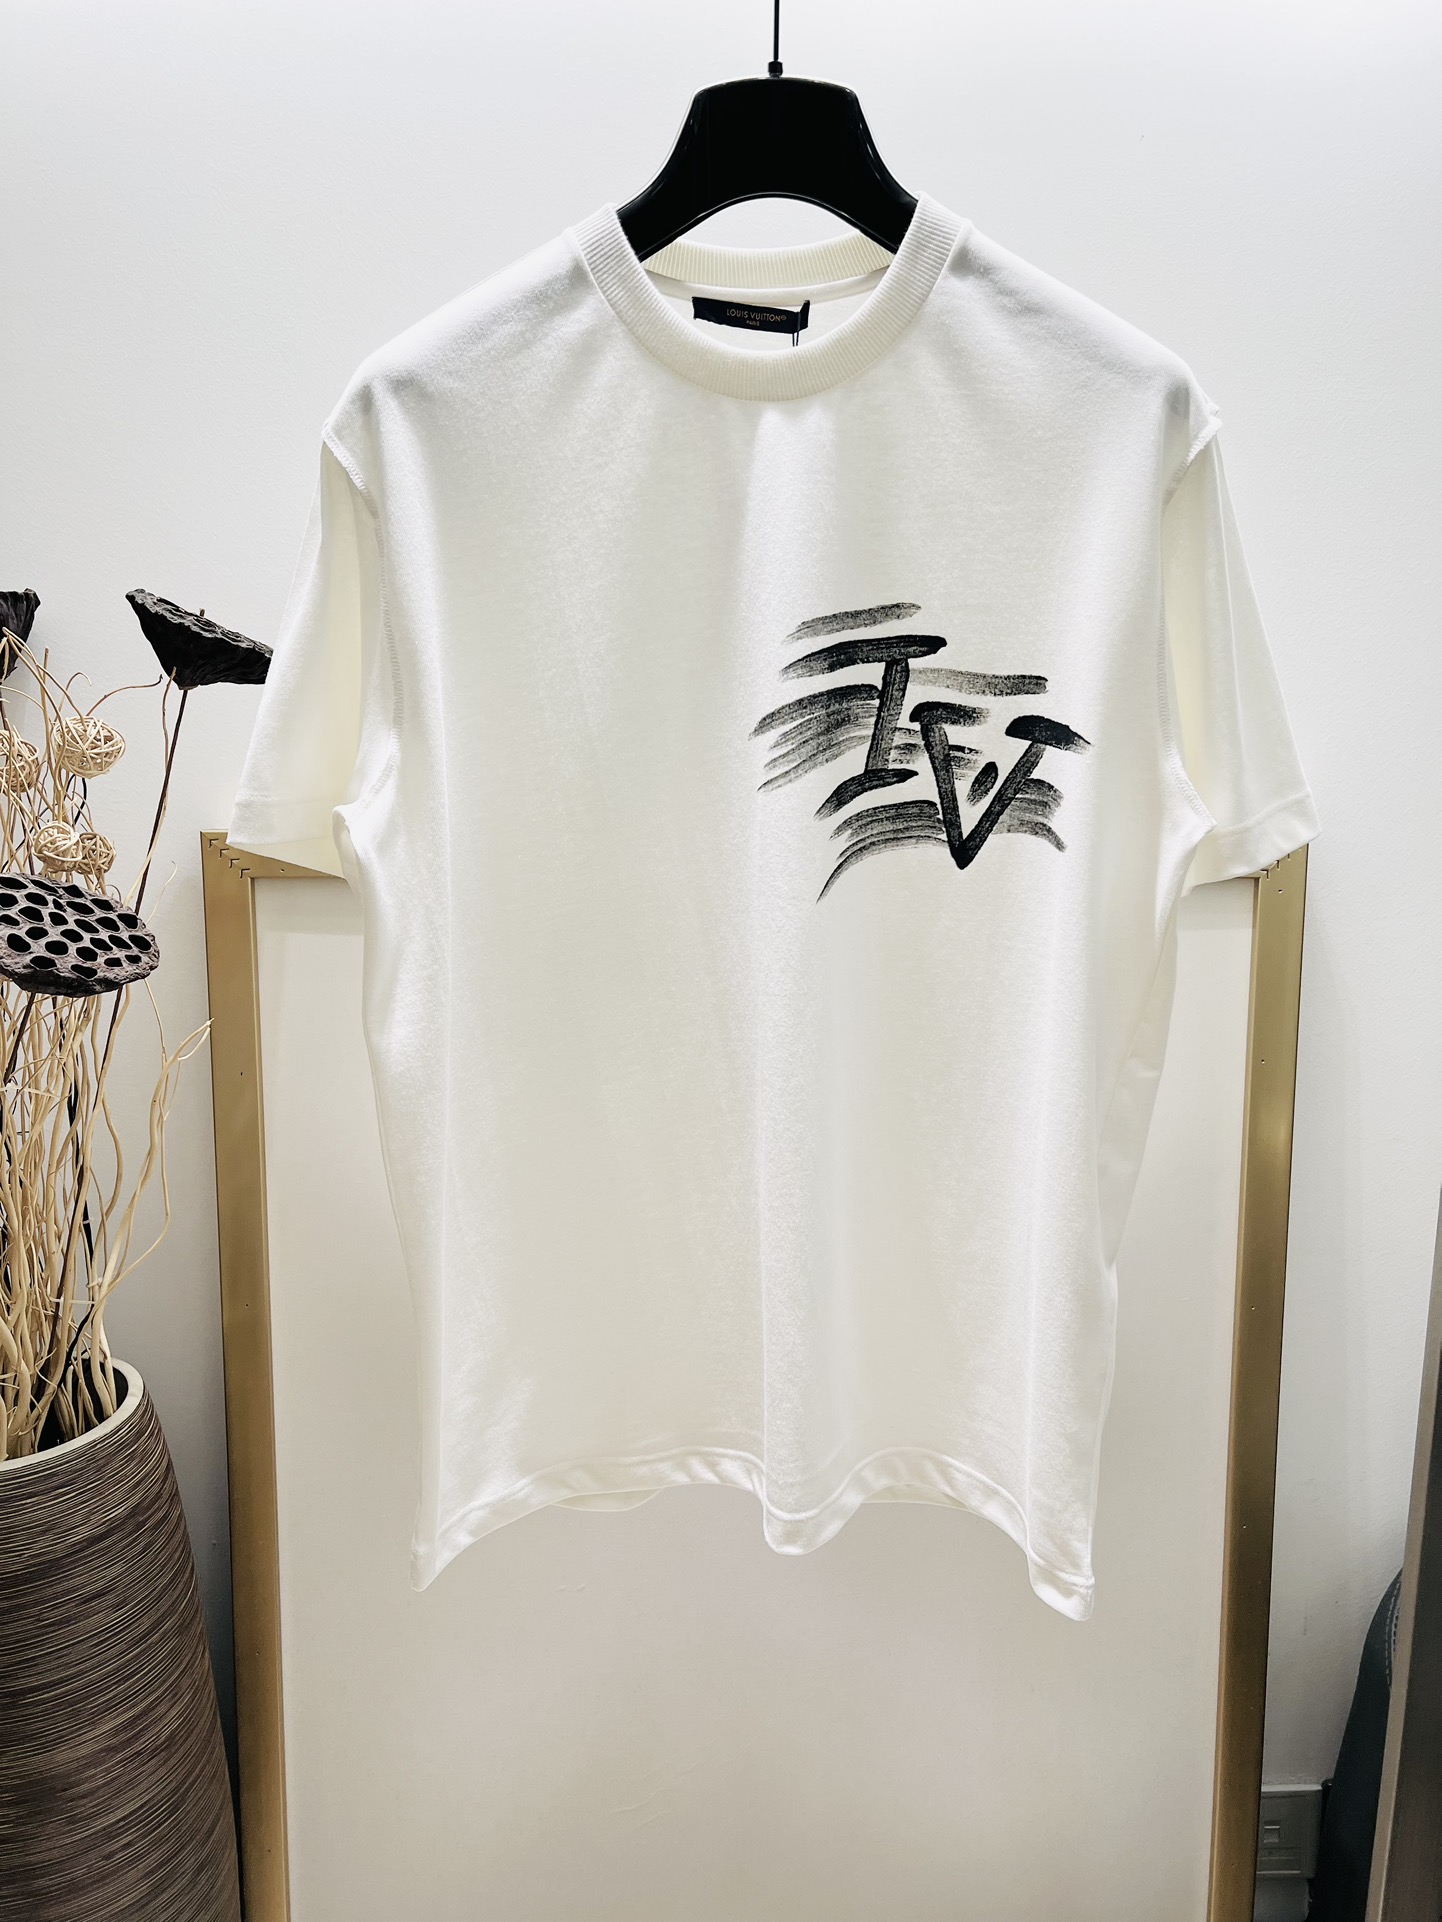 We Curate The Best
 Louis Vuitton Clothing T-Shirt Black Doodle White Printing Unisex Cotton